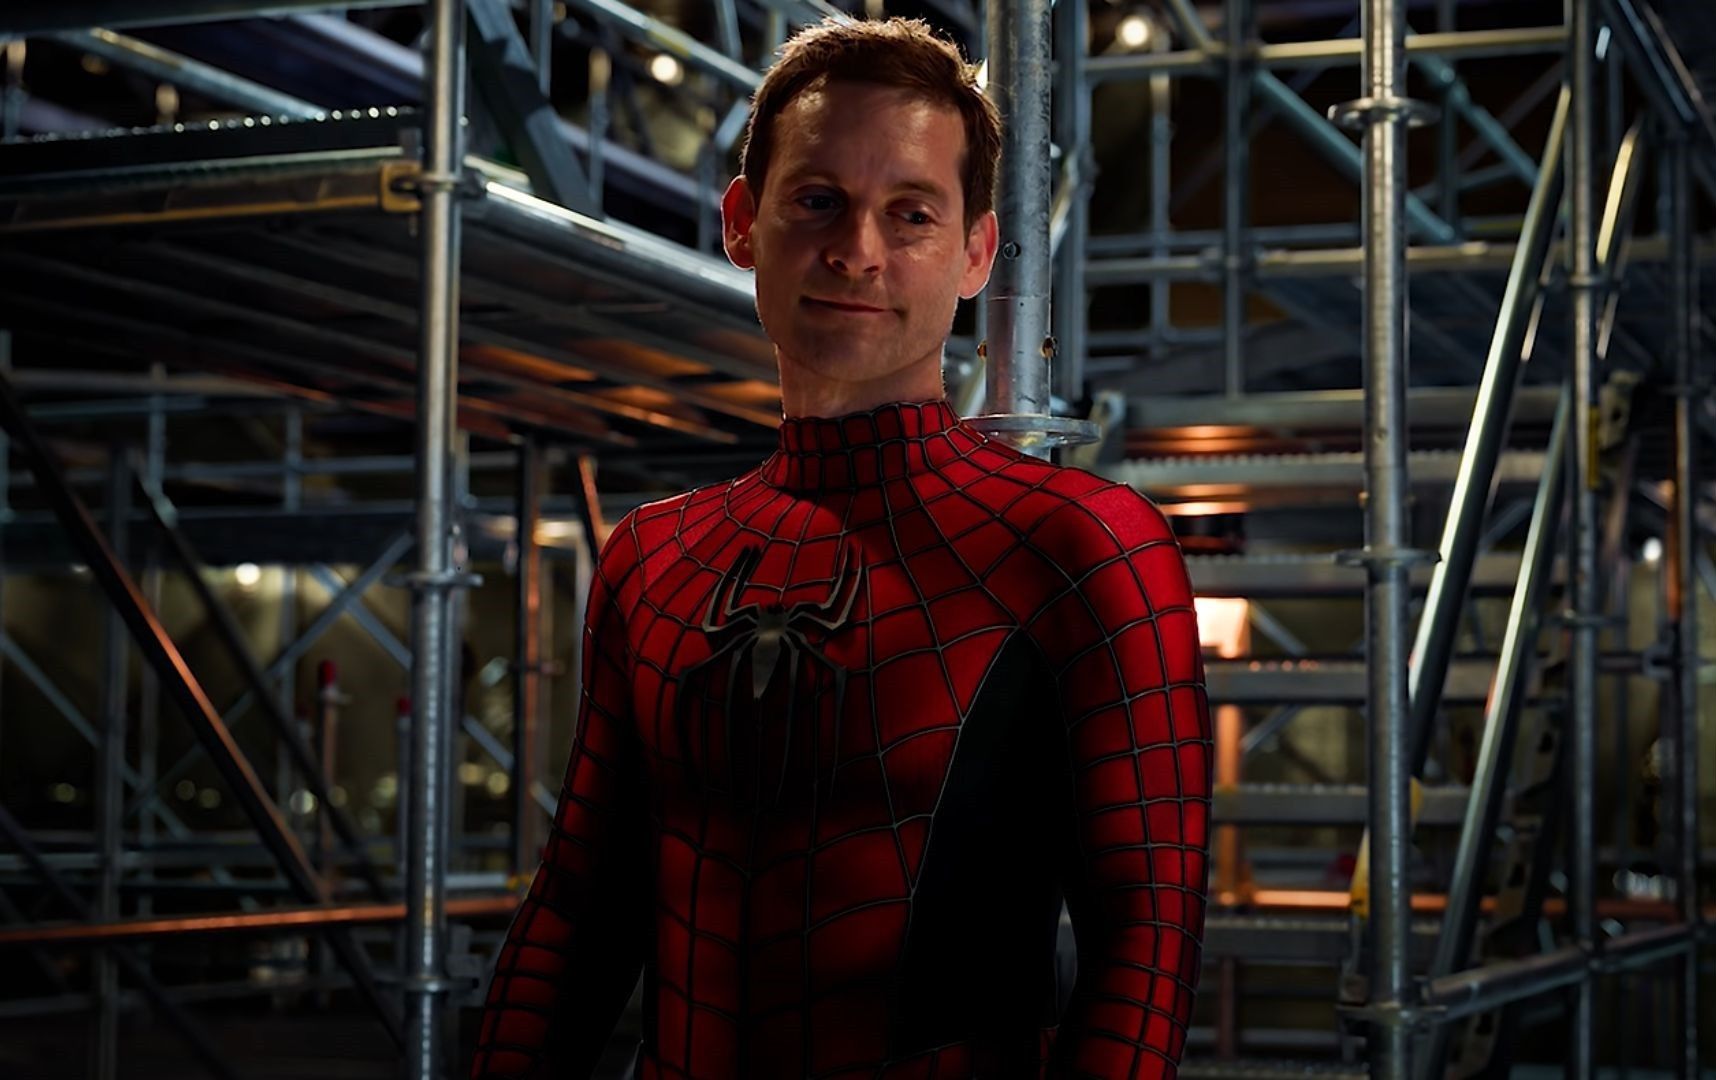 Tobey Maguire open to playing Spider-Man again